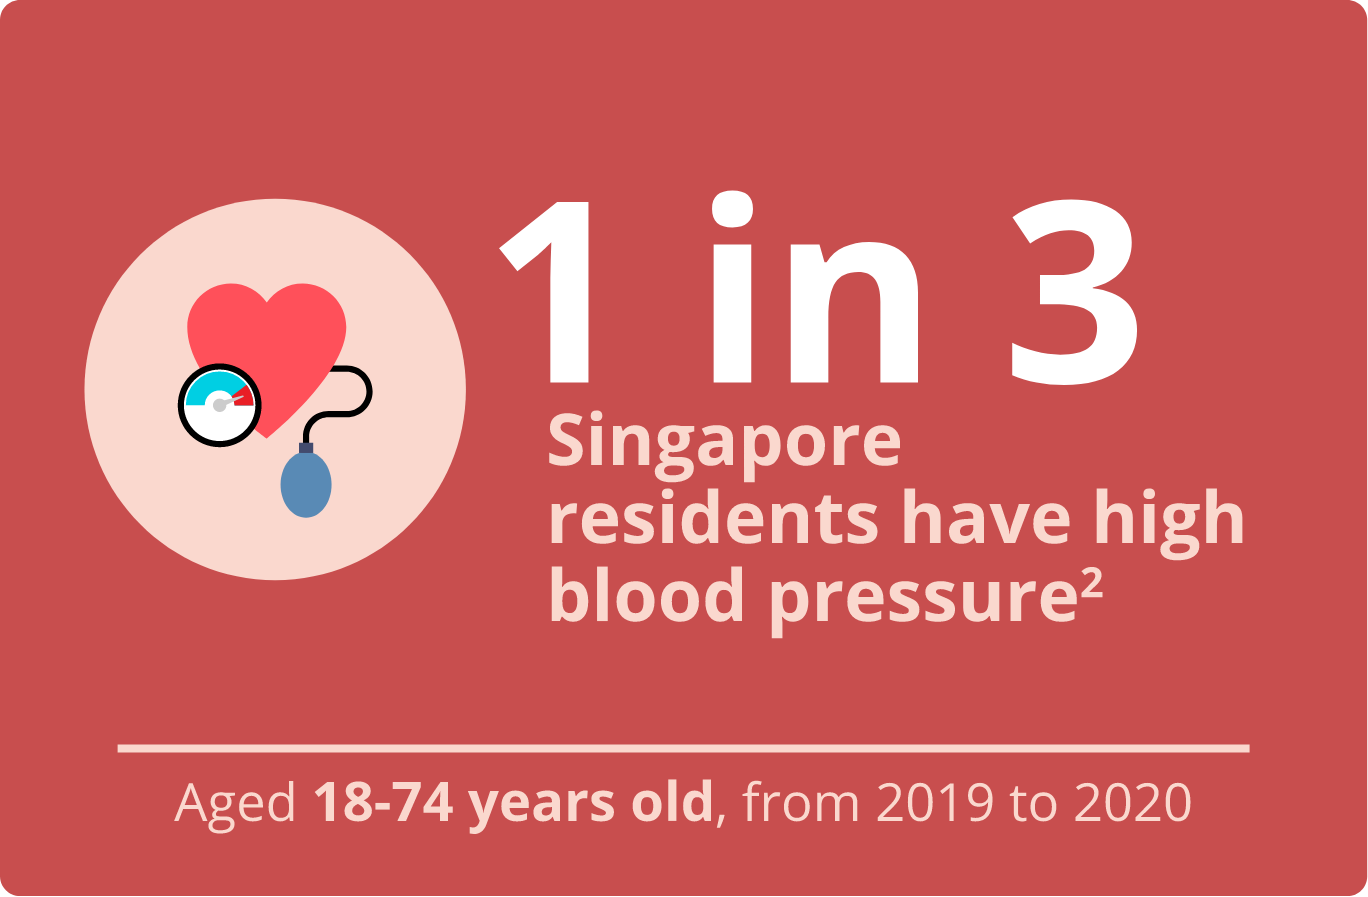 1 in 3 Singapore residents have high blood pressure?